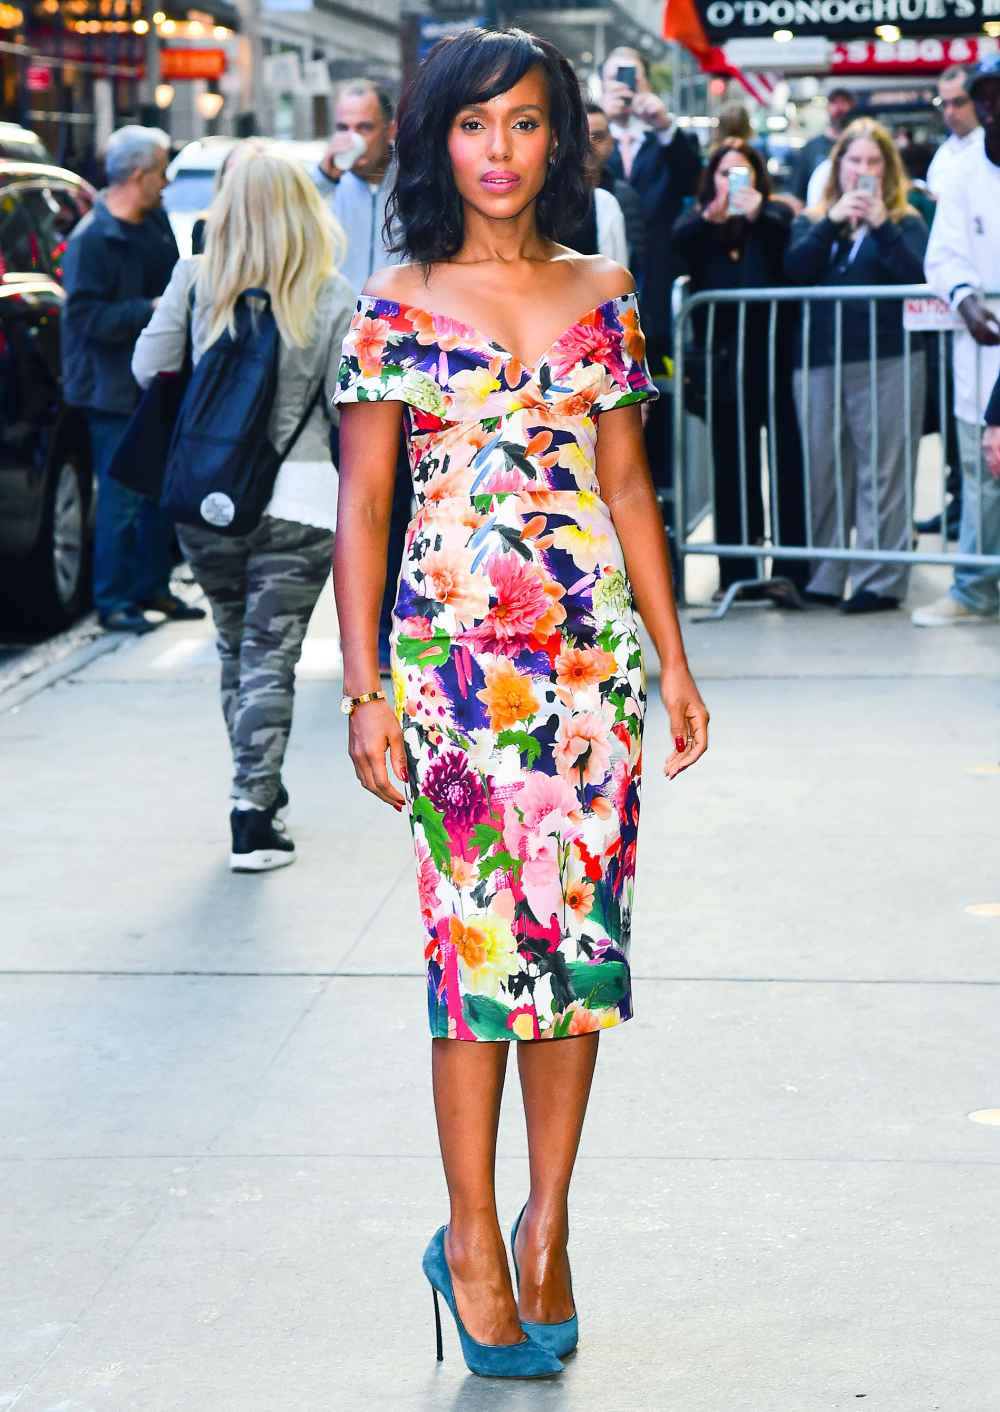 Kerry Washington causes a stir in a risqué cutout dress you need to see